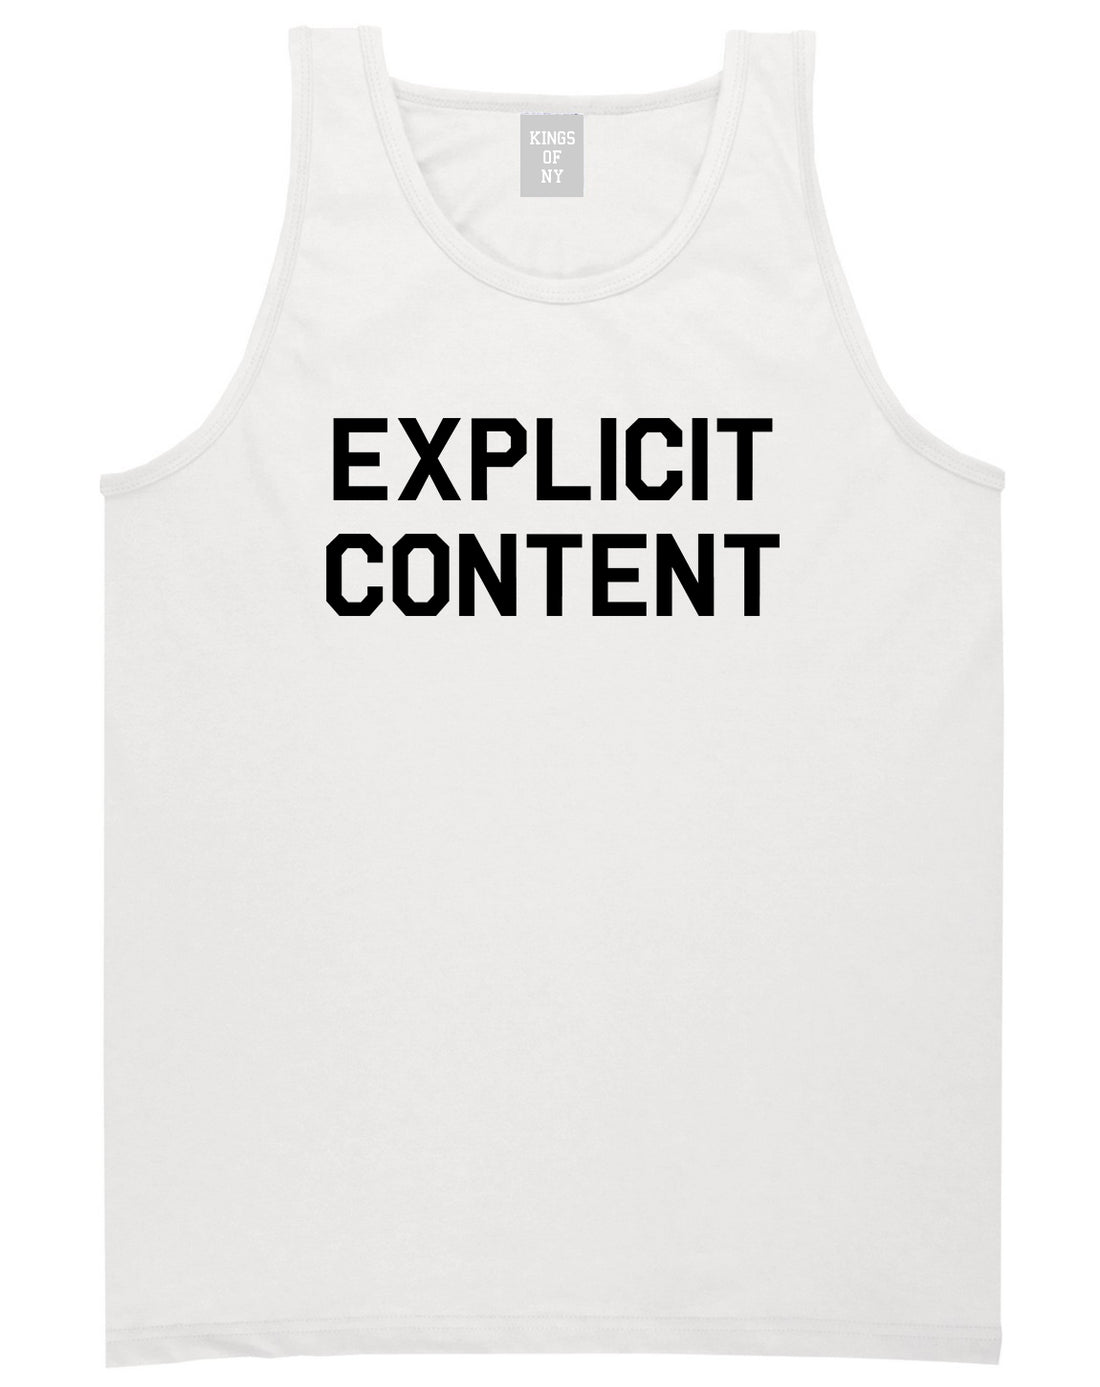 Explicit_Content Mens White Tank Top Shirt by Kings Of NY